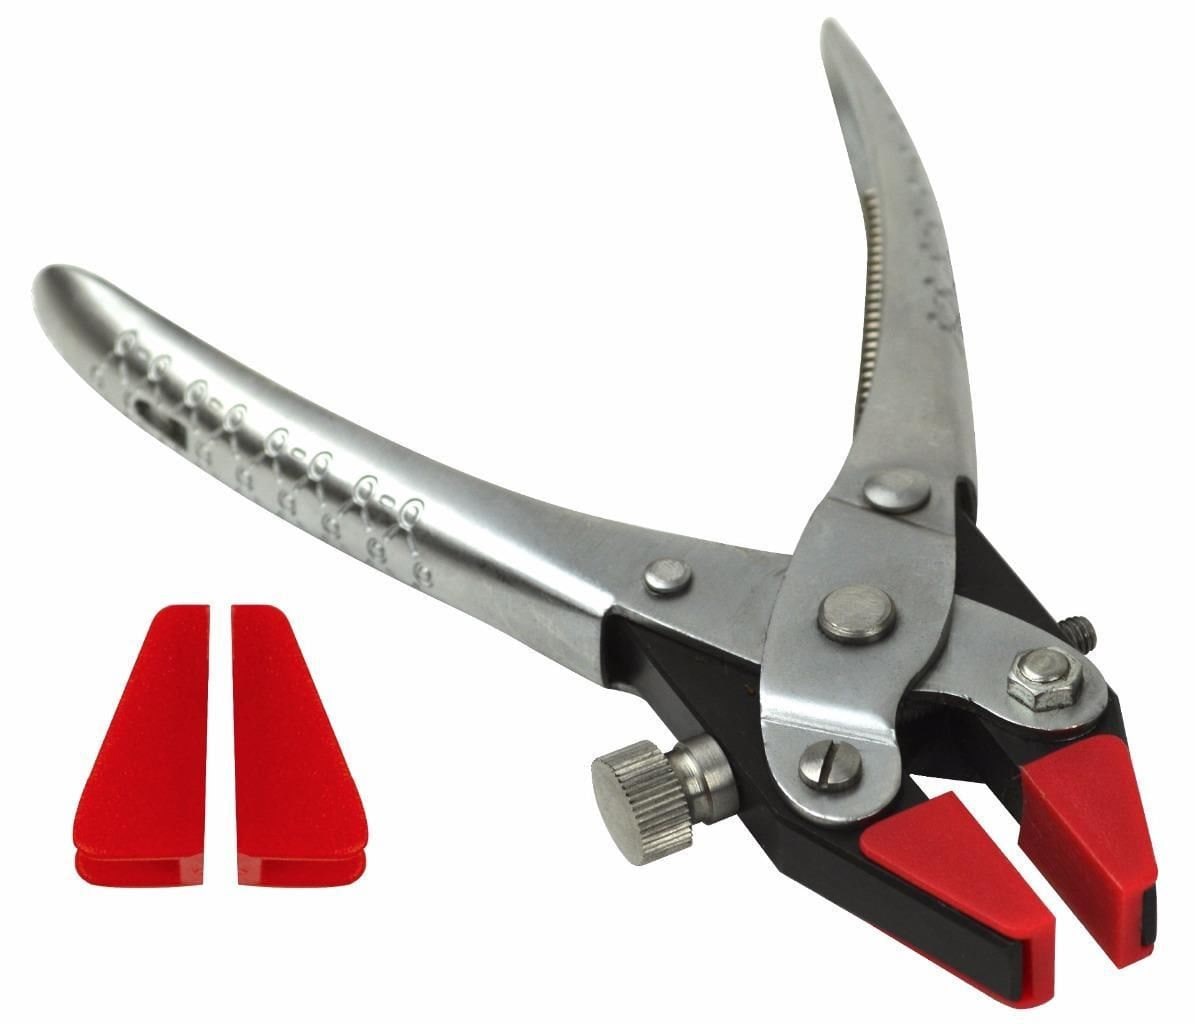 PSI Locking Soft-Grip Pliers for Pen Disassembly